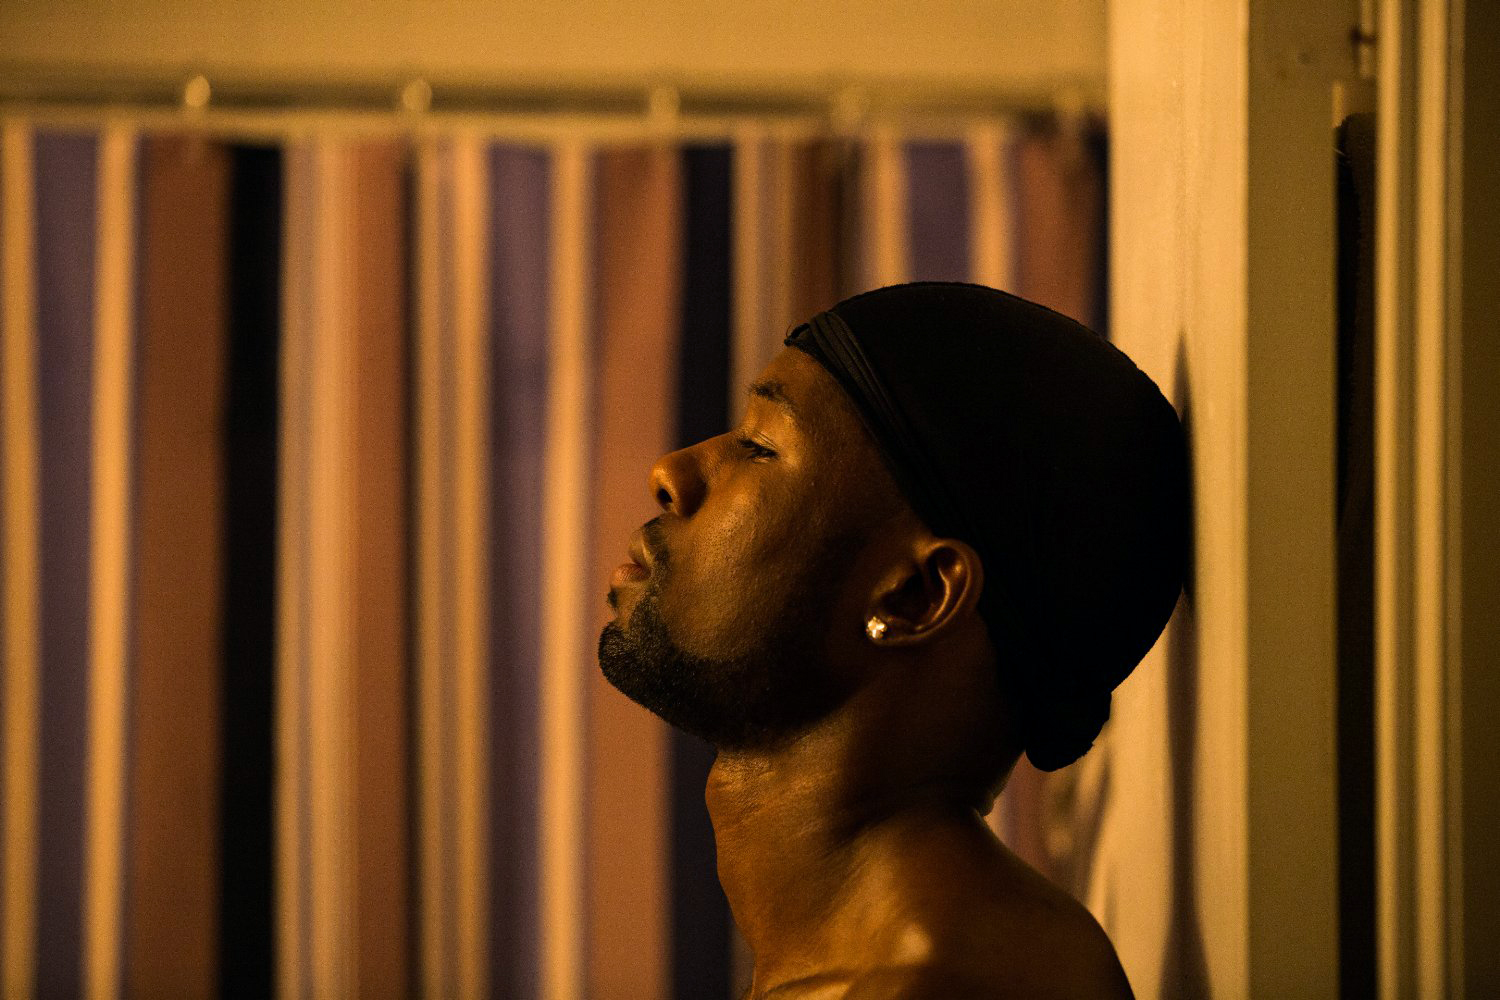 PHOTO: Trevante Rhodes, as Black, in a scene from "Moonlight."